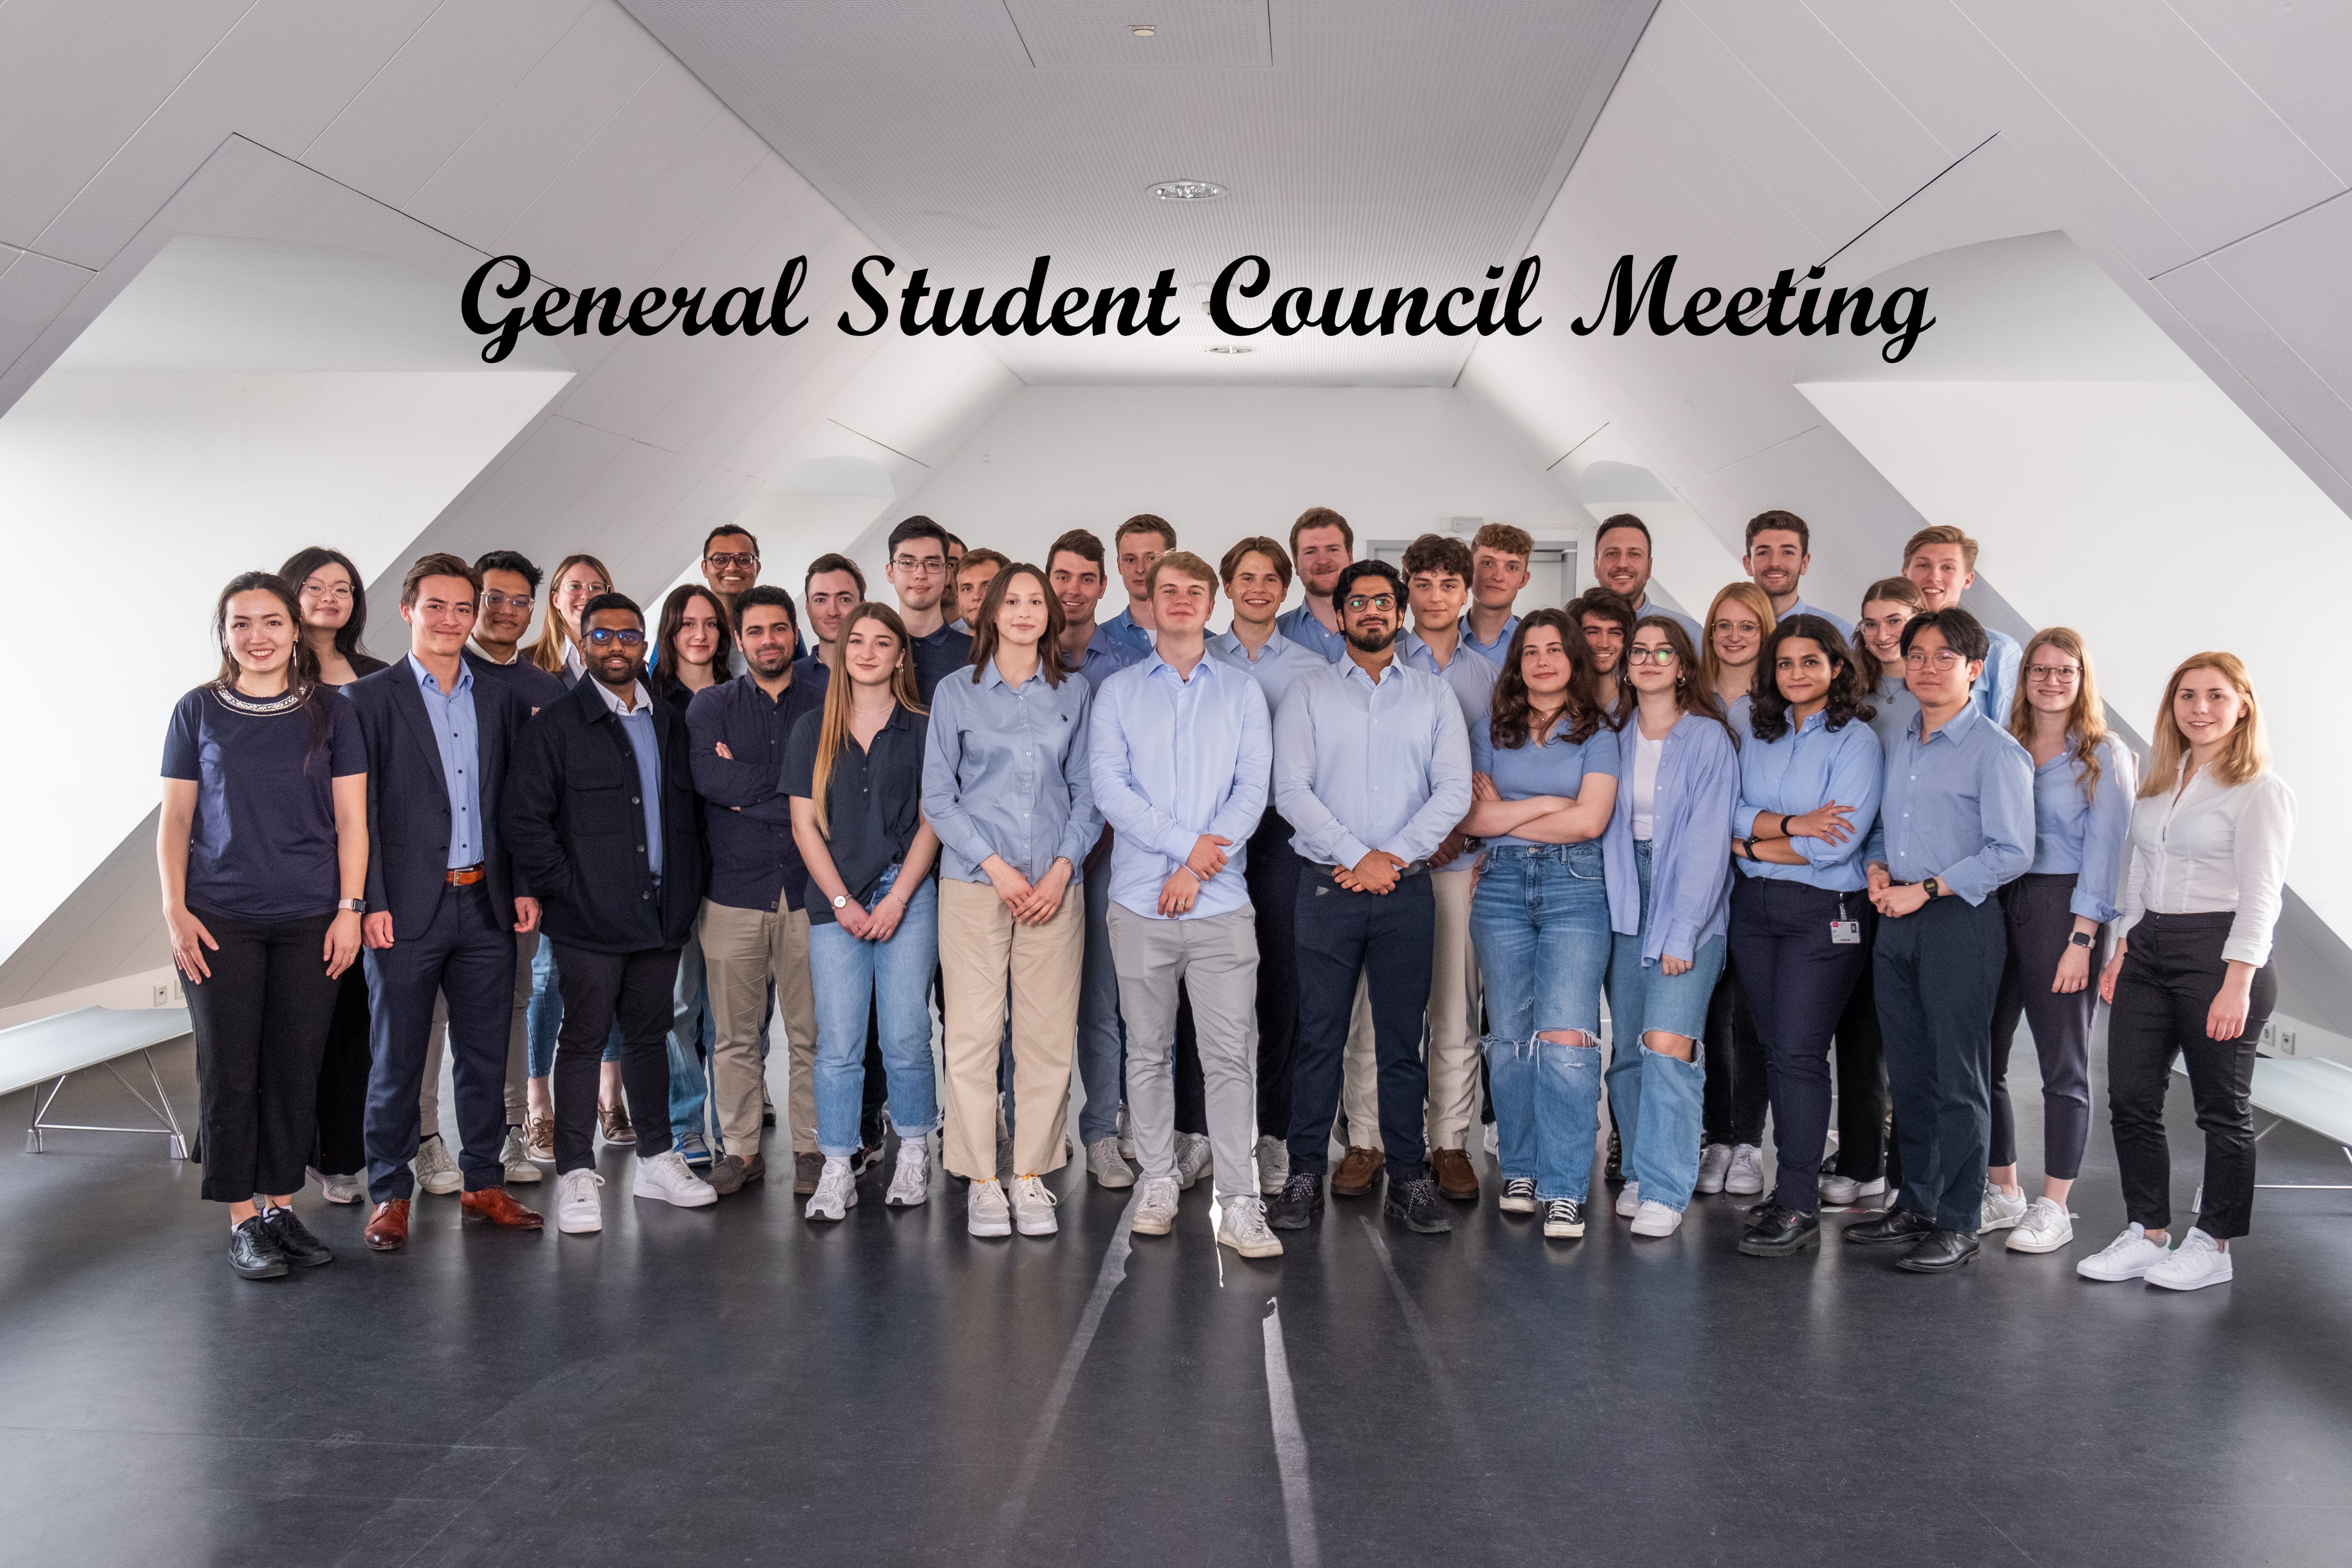 7th General Student Council Meeting